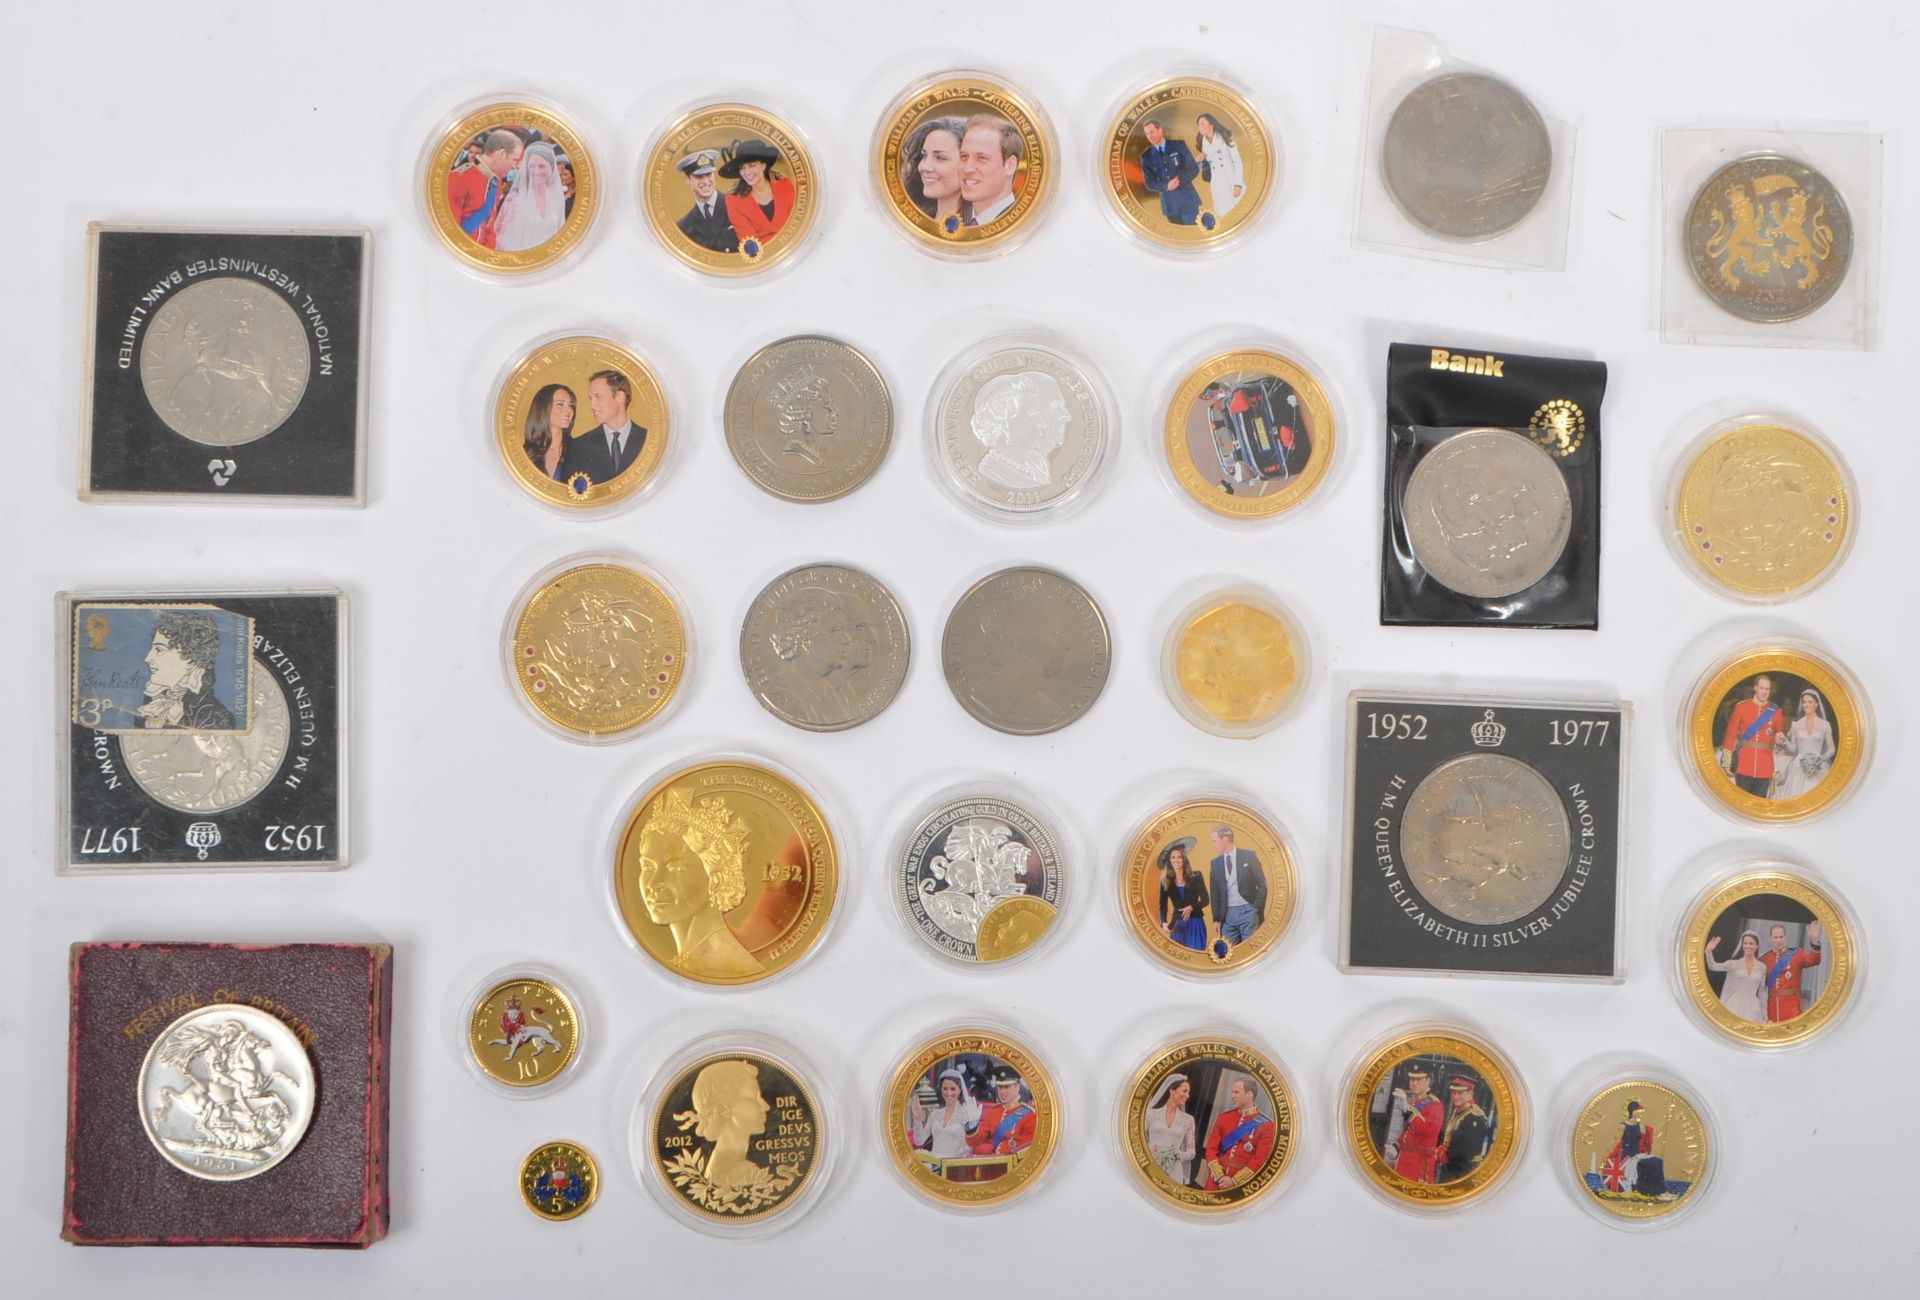 COLLECTION OF ROYAL FAMILY COMMEMORATIVE COINS